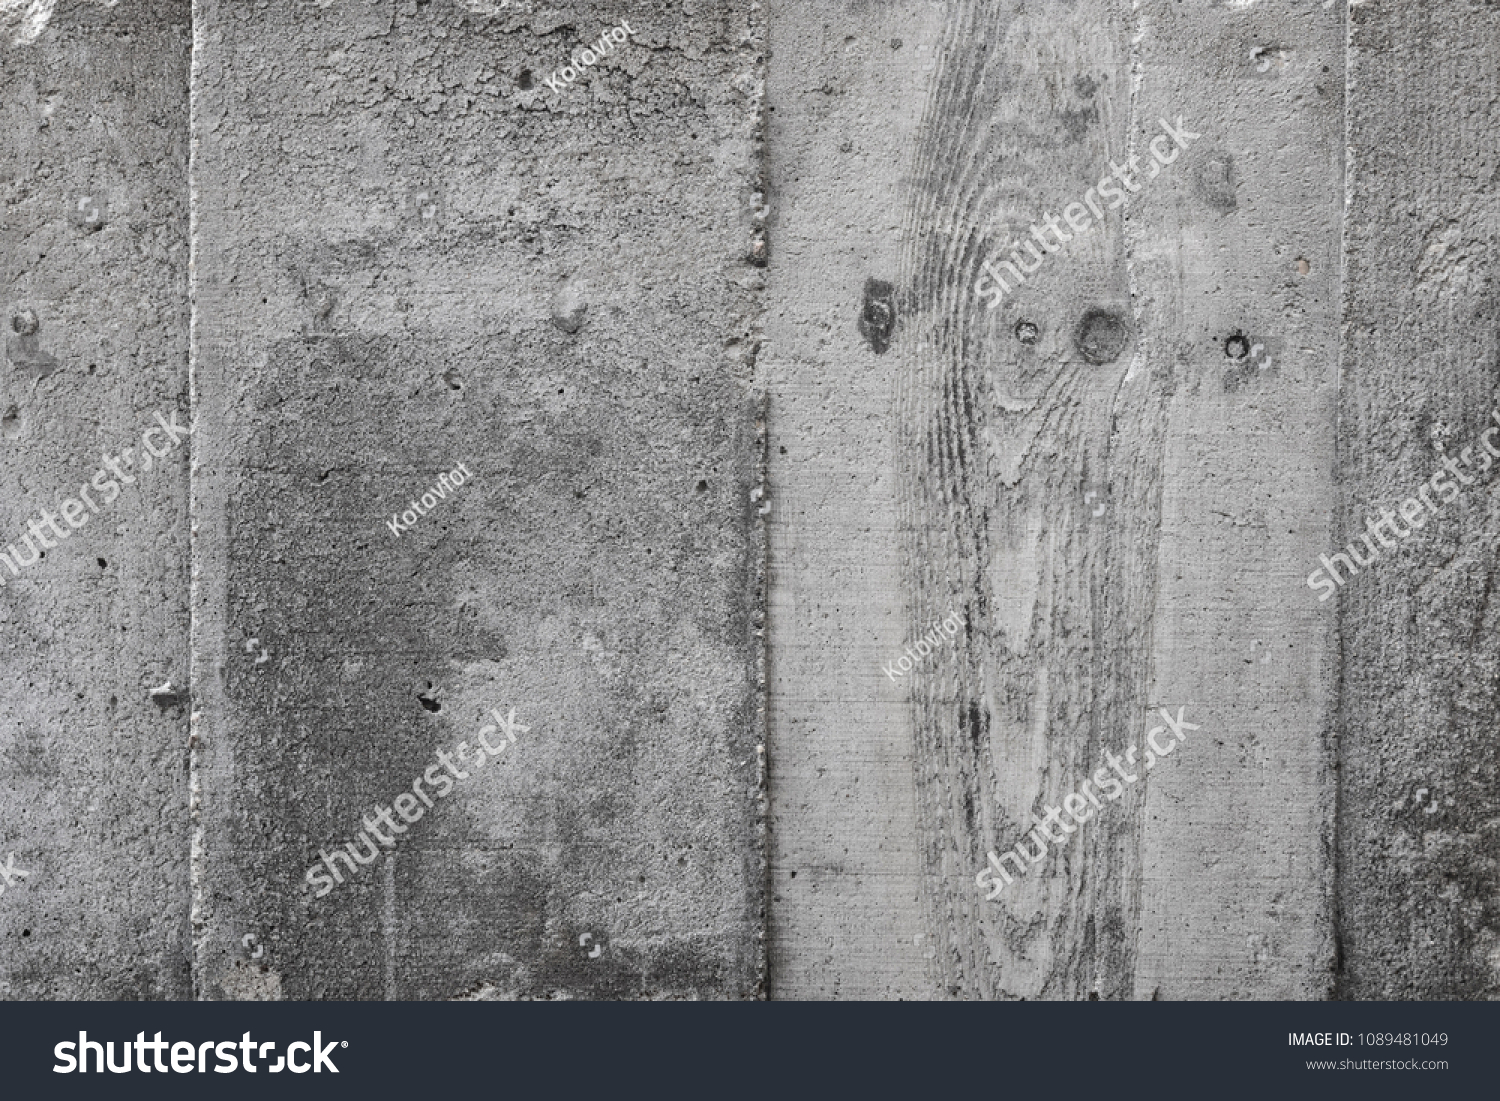 Texture of concrete. A wooden board imprint on the foundation. #1089481049